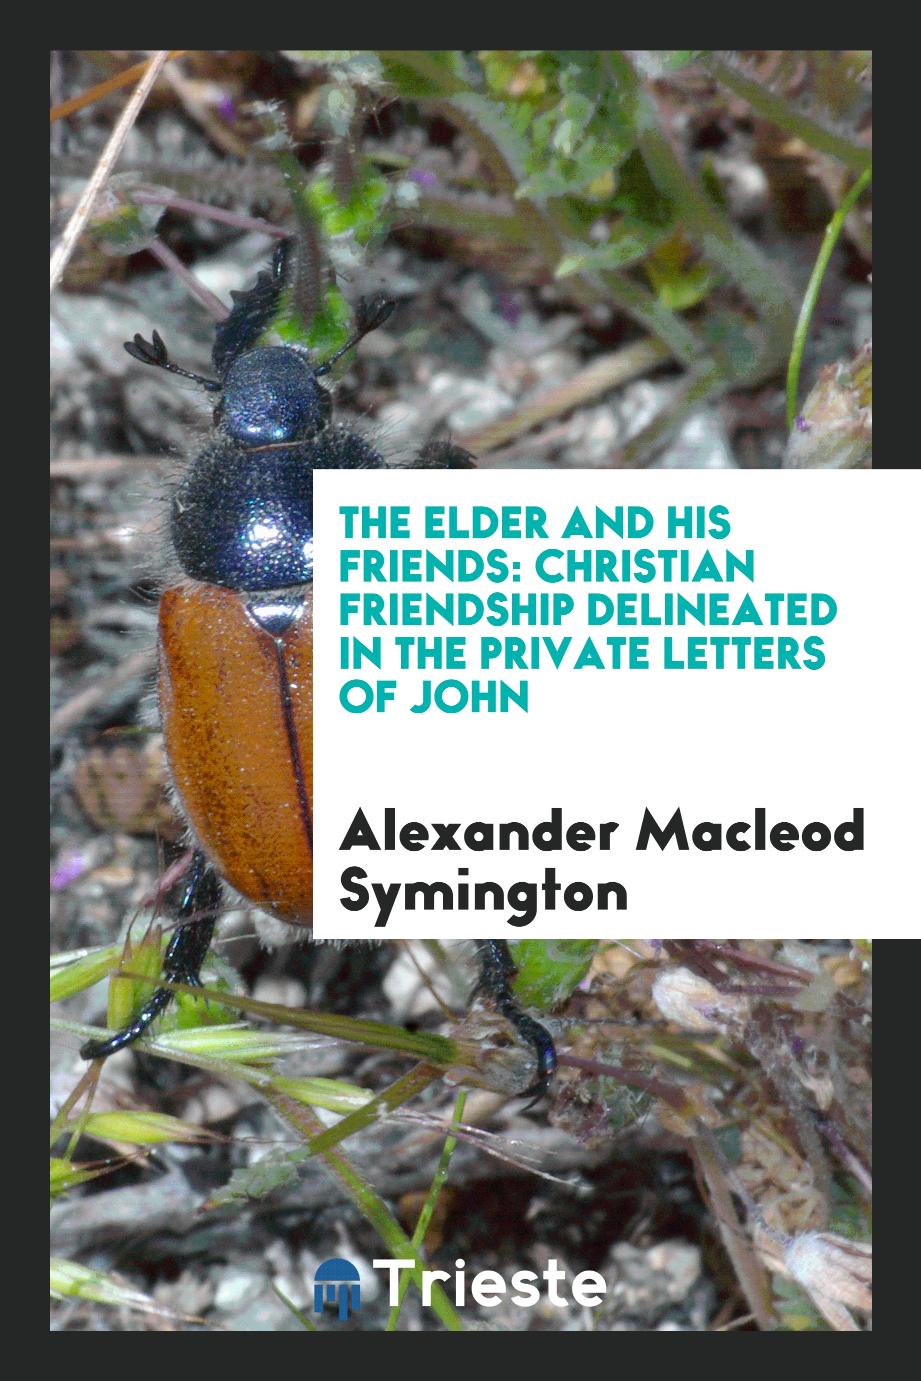 Alexander Macleod Symington - The Elder and His Friends: Christian Friendship Delineated in the Private Letters of John